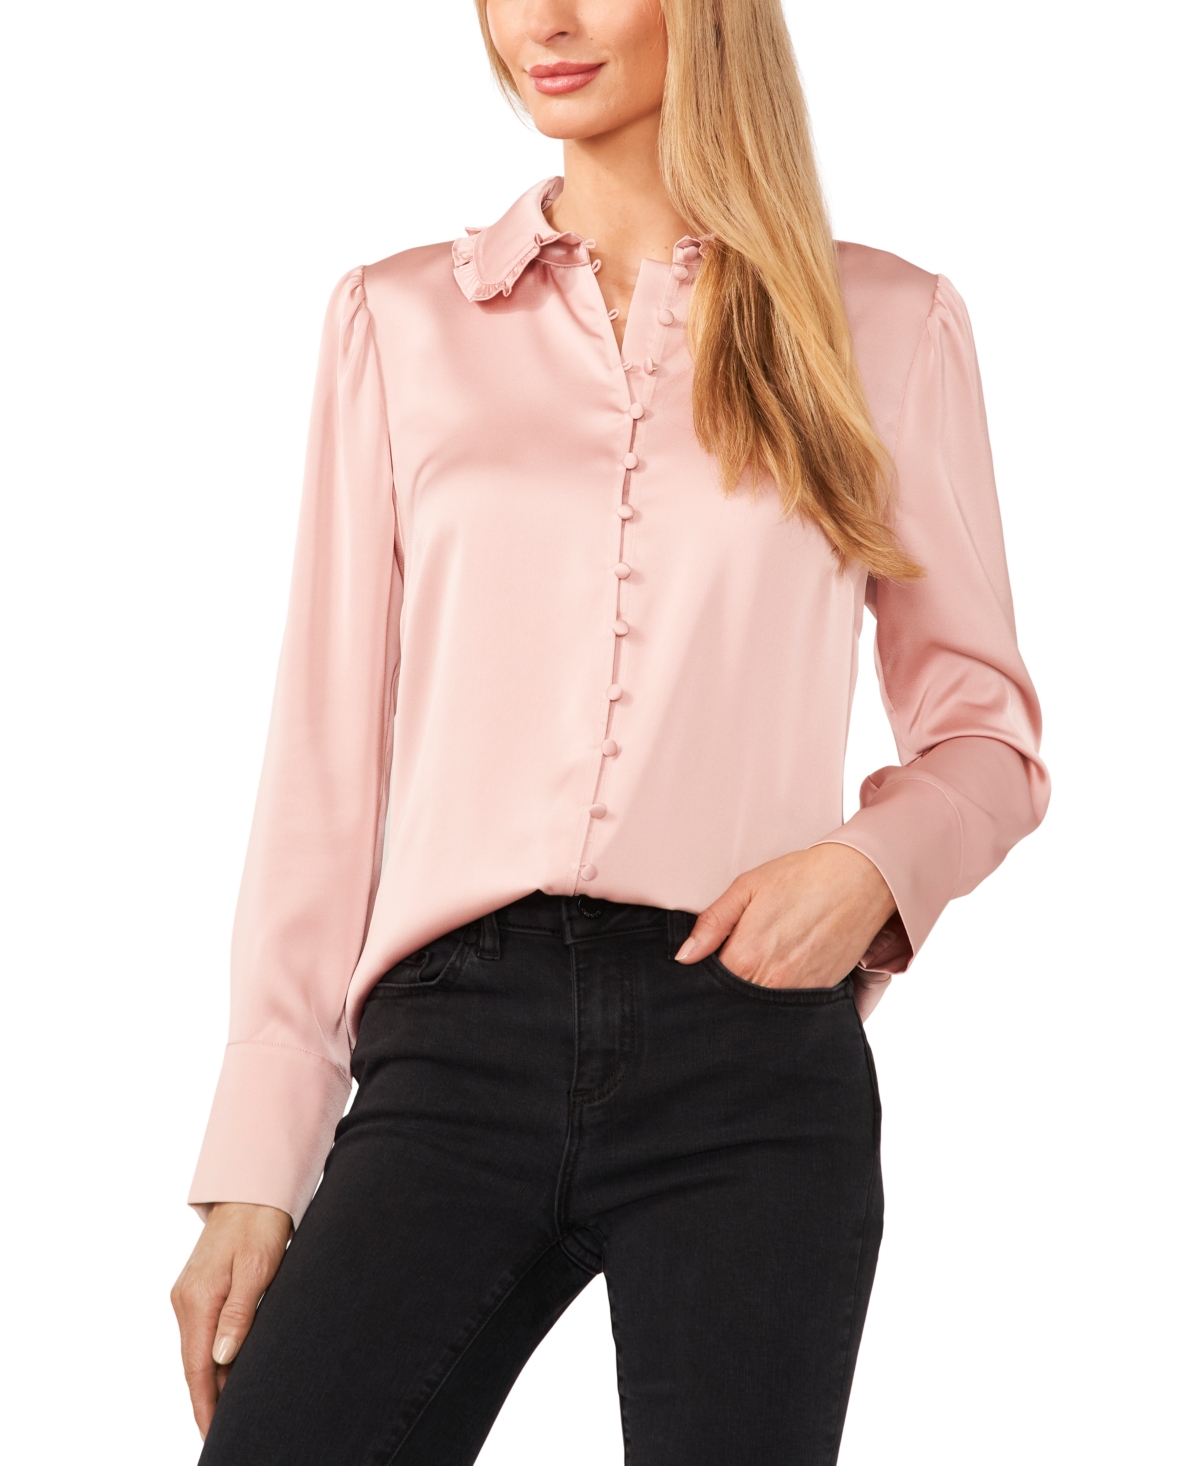 1930s Blouses, Tops, Shirt Styles | History CeCe Womens Ruffle-Collar Button-Front Blouse - Misty Pink $50.56 AT vintagedancer.com